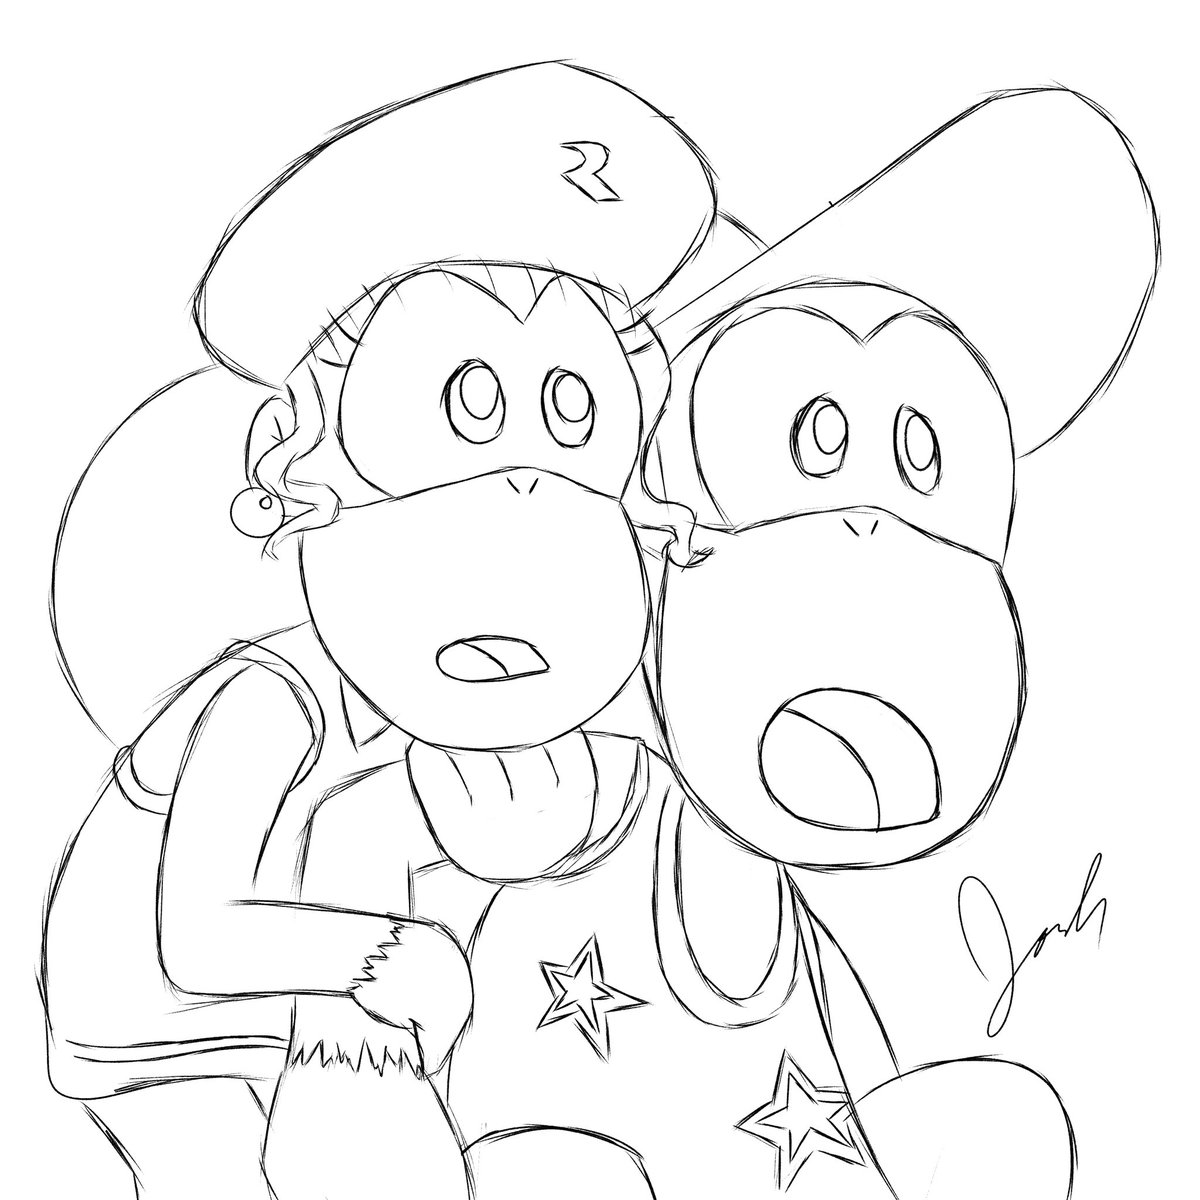 Yeah, seeing Diddy and Dixie Kong in the Mario Movie was the highlight for me #mariomovieart #diddykong #dixiekong #supermariomovie #drawing #sketch #art #ArtistOnTwitter #mariomovie2023 #mariomoviefanart #donkeykong